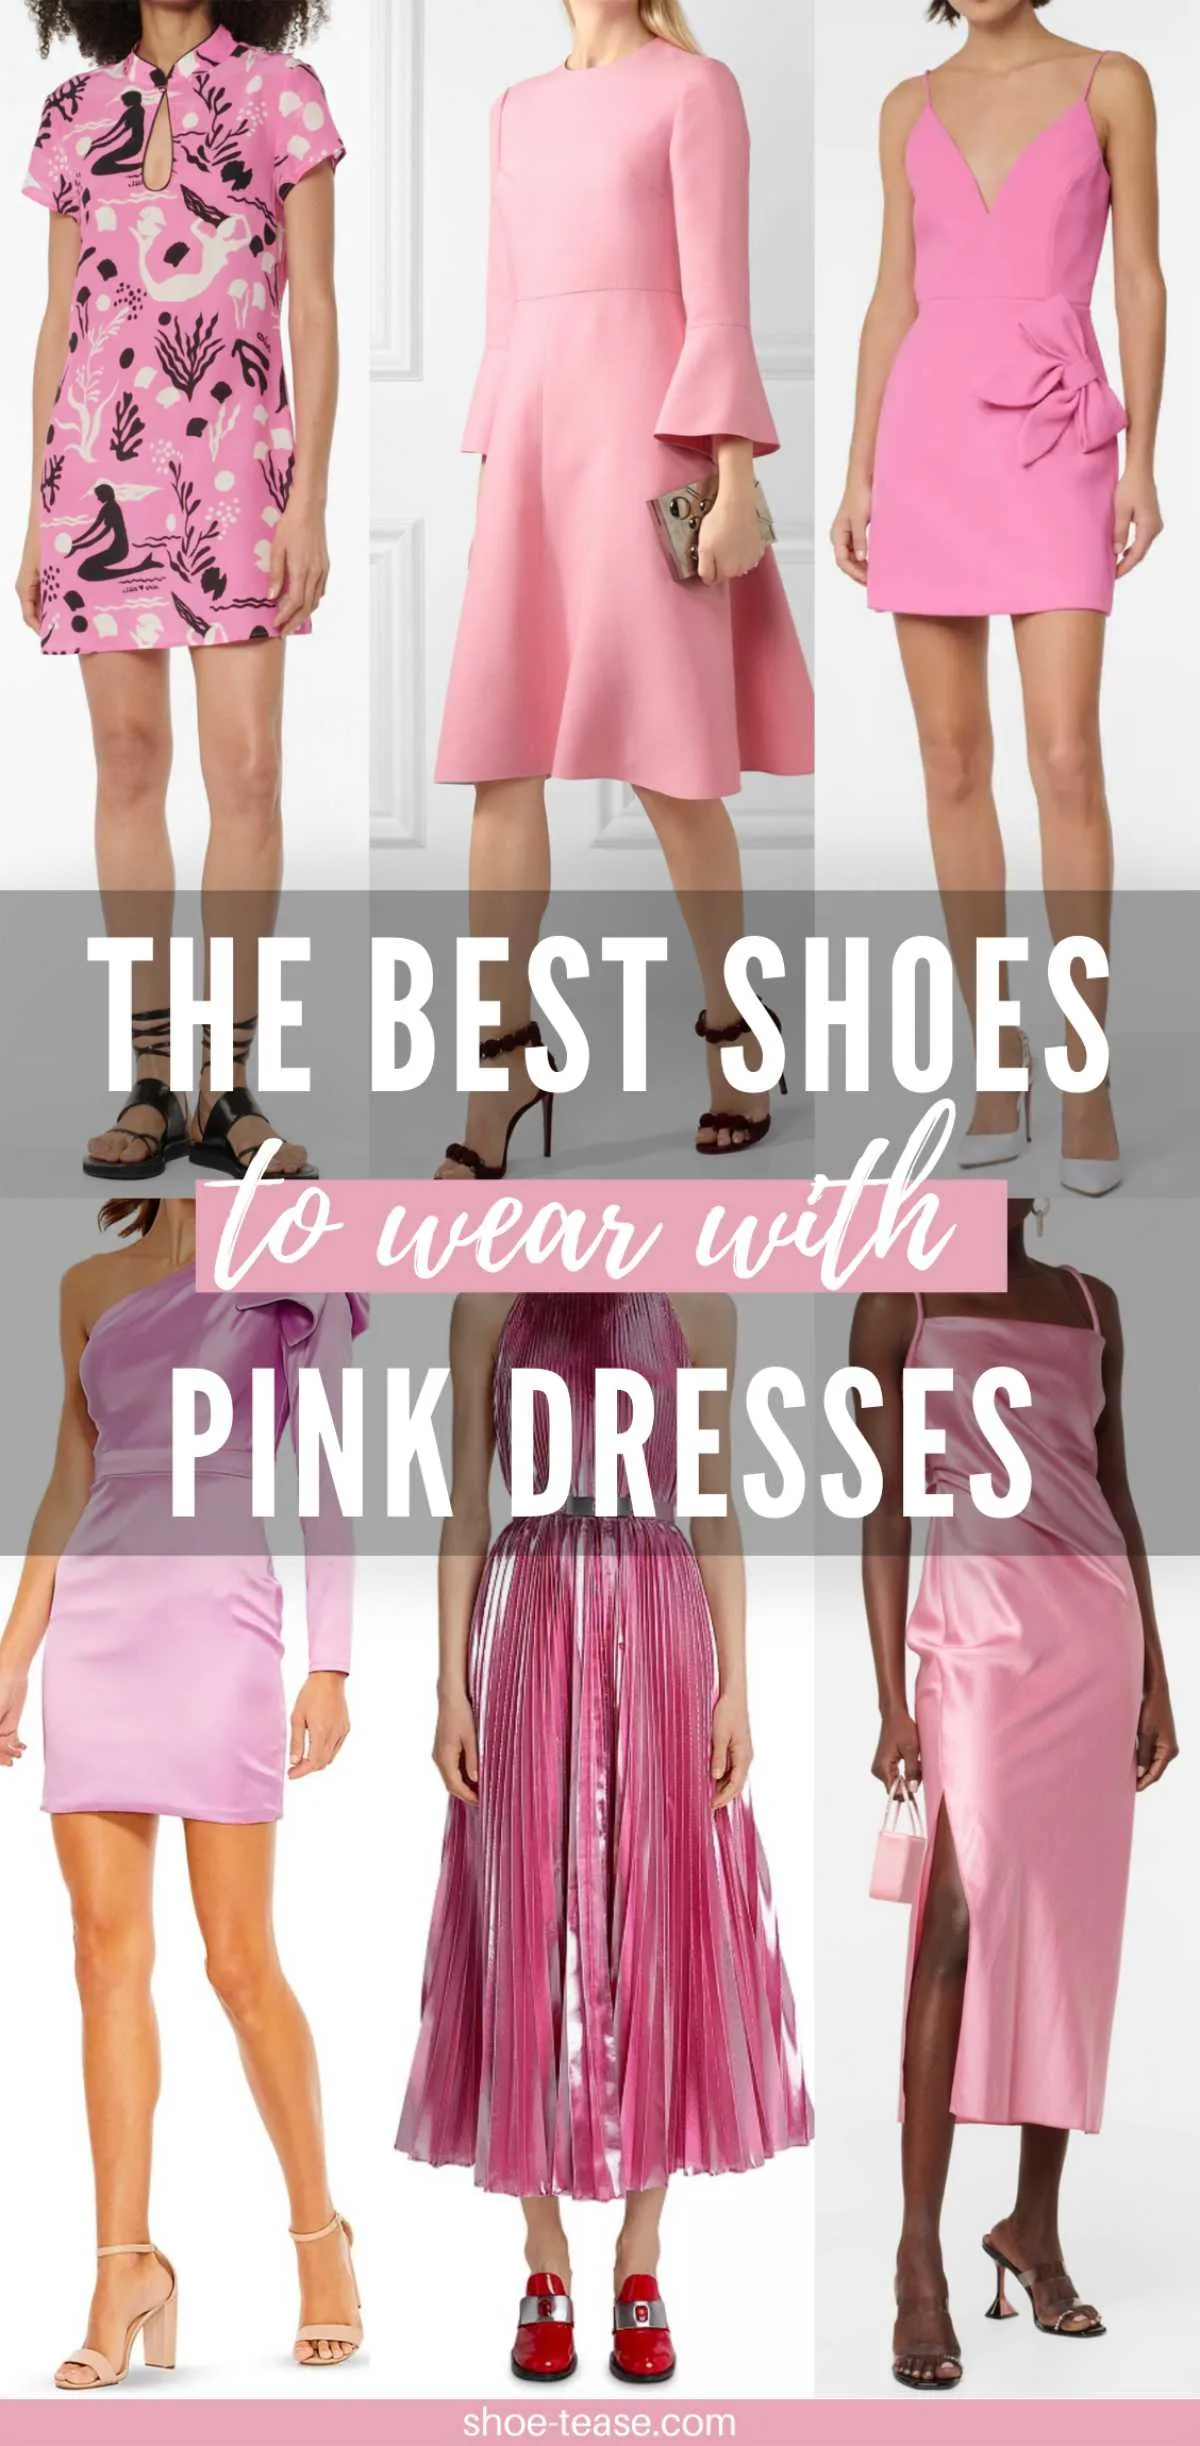 10 Shoes To Wear With a Maxi Dress - Strawberry Chic